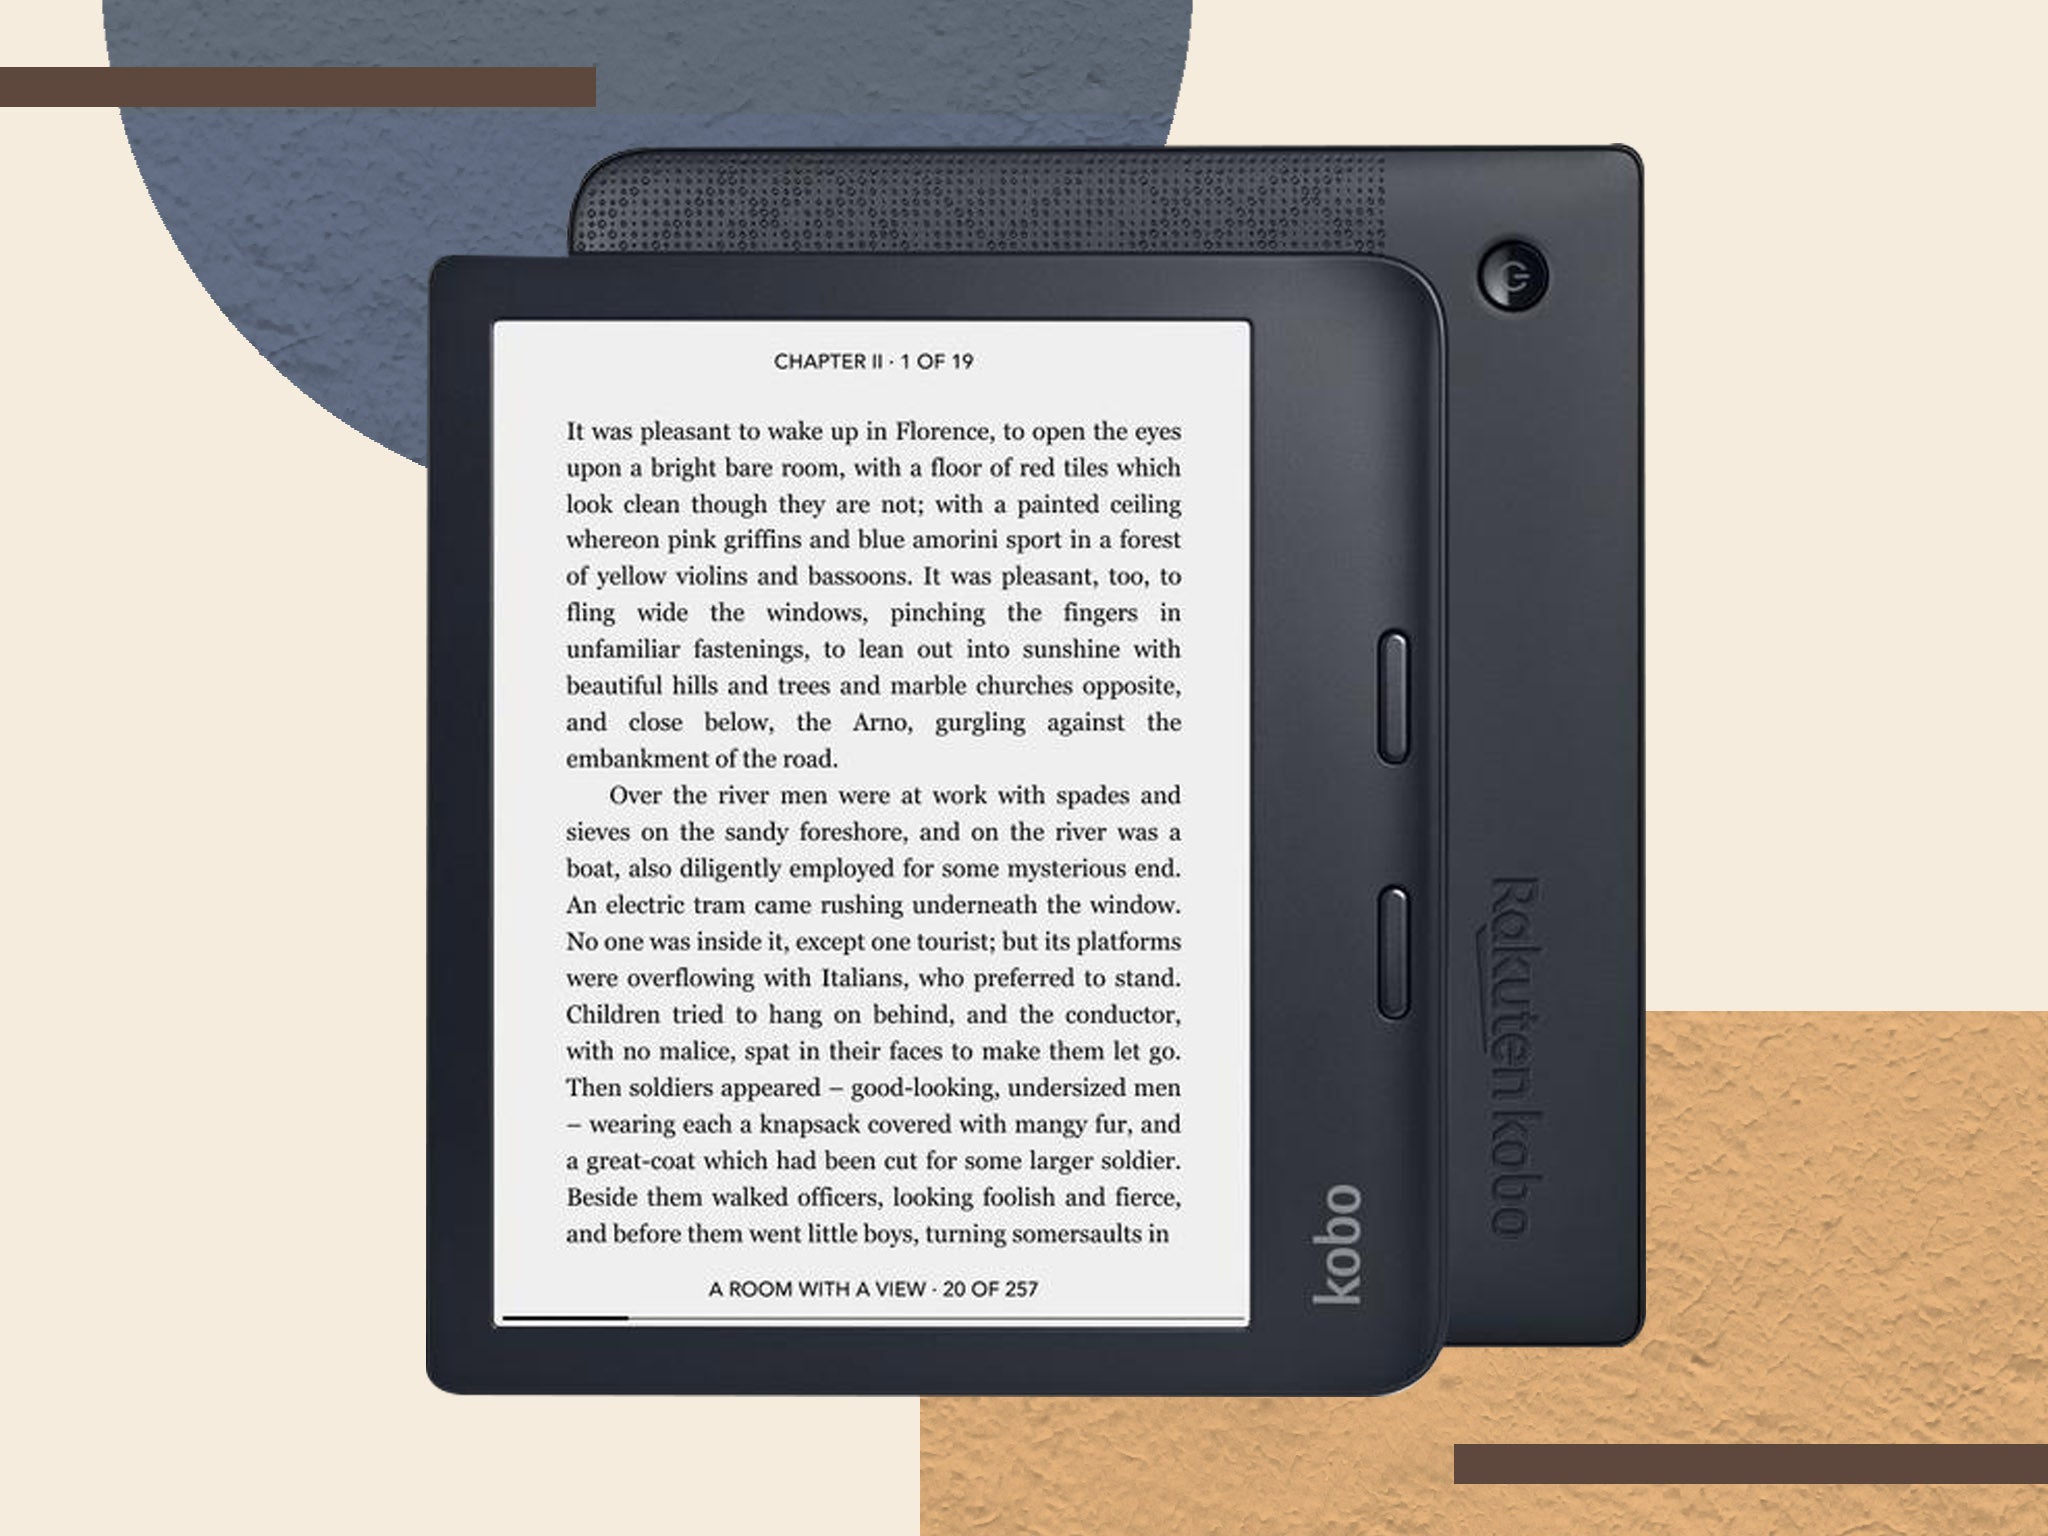 Kobo Libra 2 Review – A very good e-Reader with audiobook support - Good  e-Reader